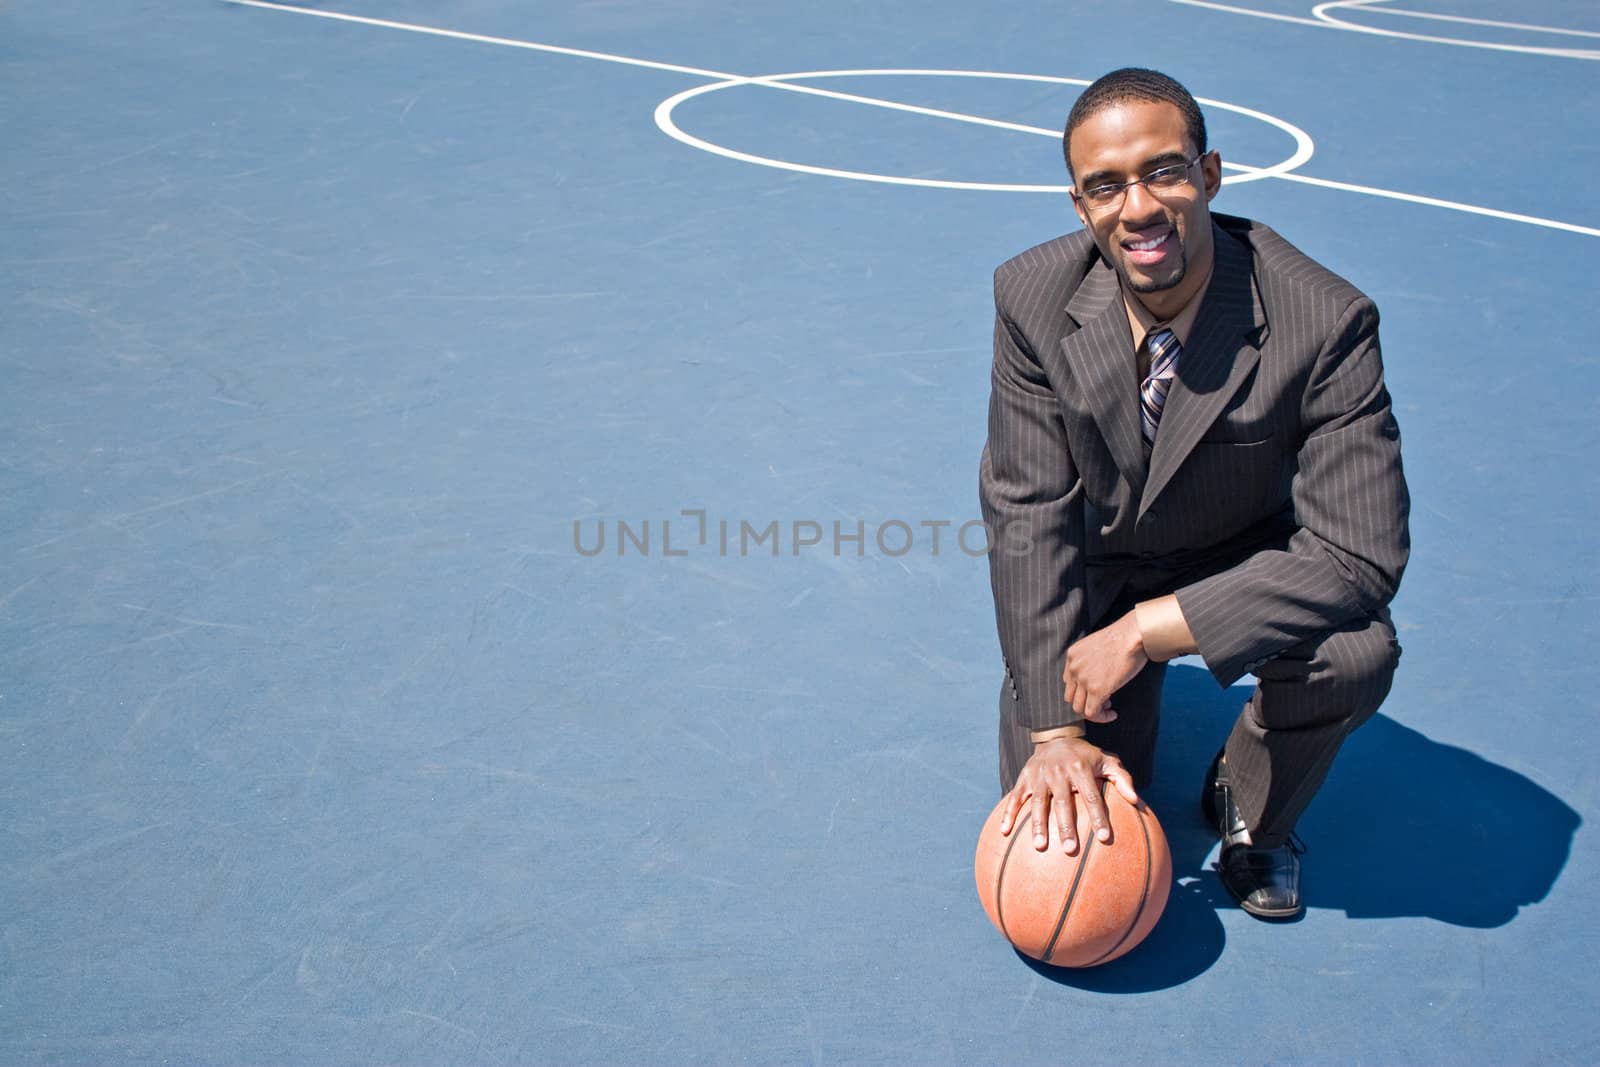 A young man in a business suit posing in the empty basketball court with lots of copyspace.